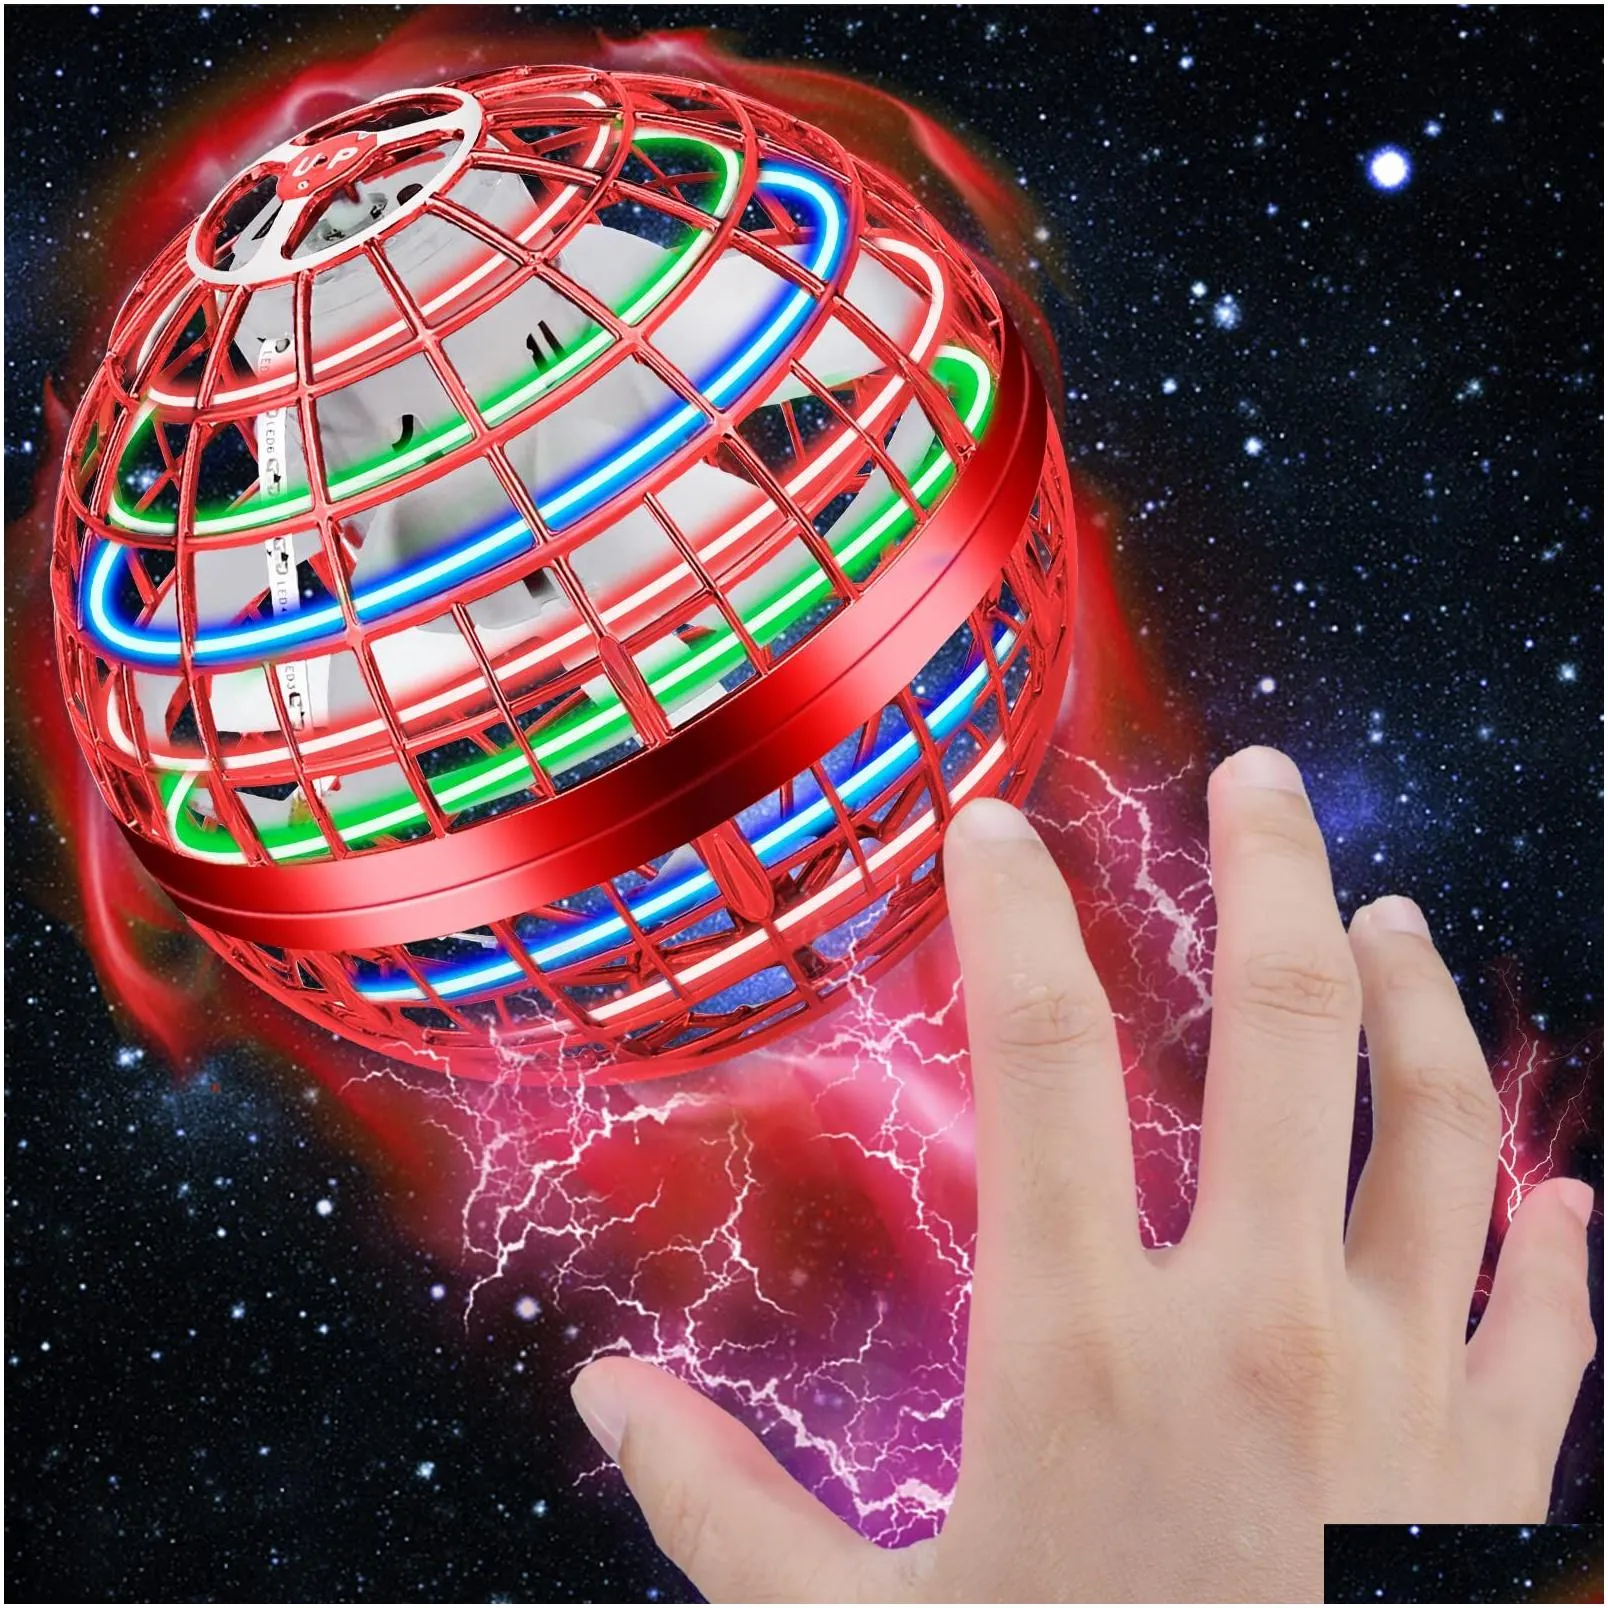 magic balls flying orb ball toy2022 upgraded space pro cool hover toy with rgb lights spinning 360° gifts for kids adts outdoor indo